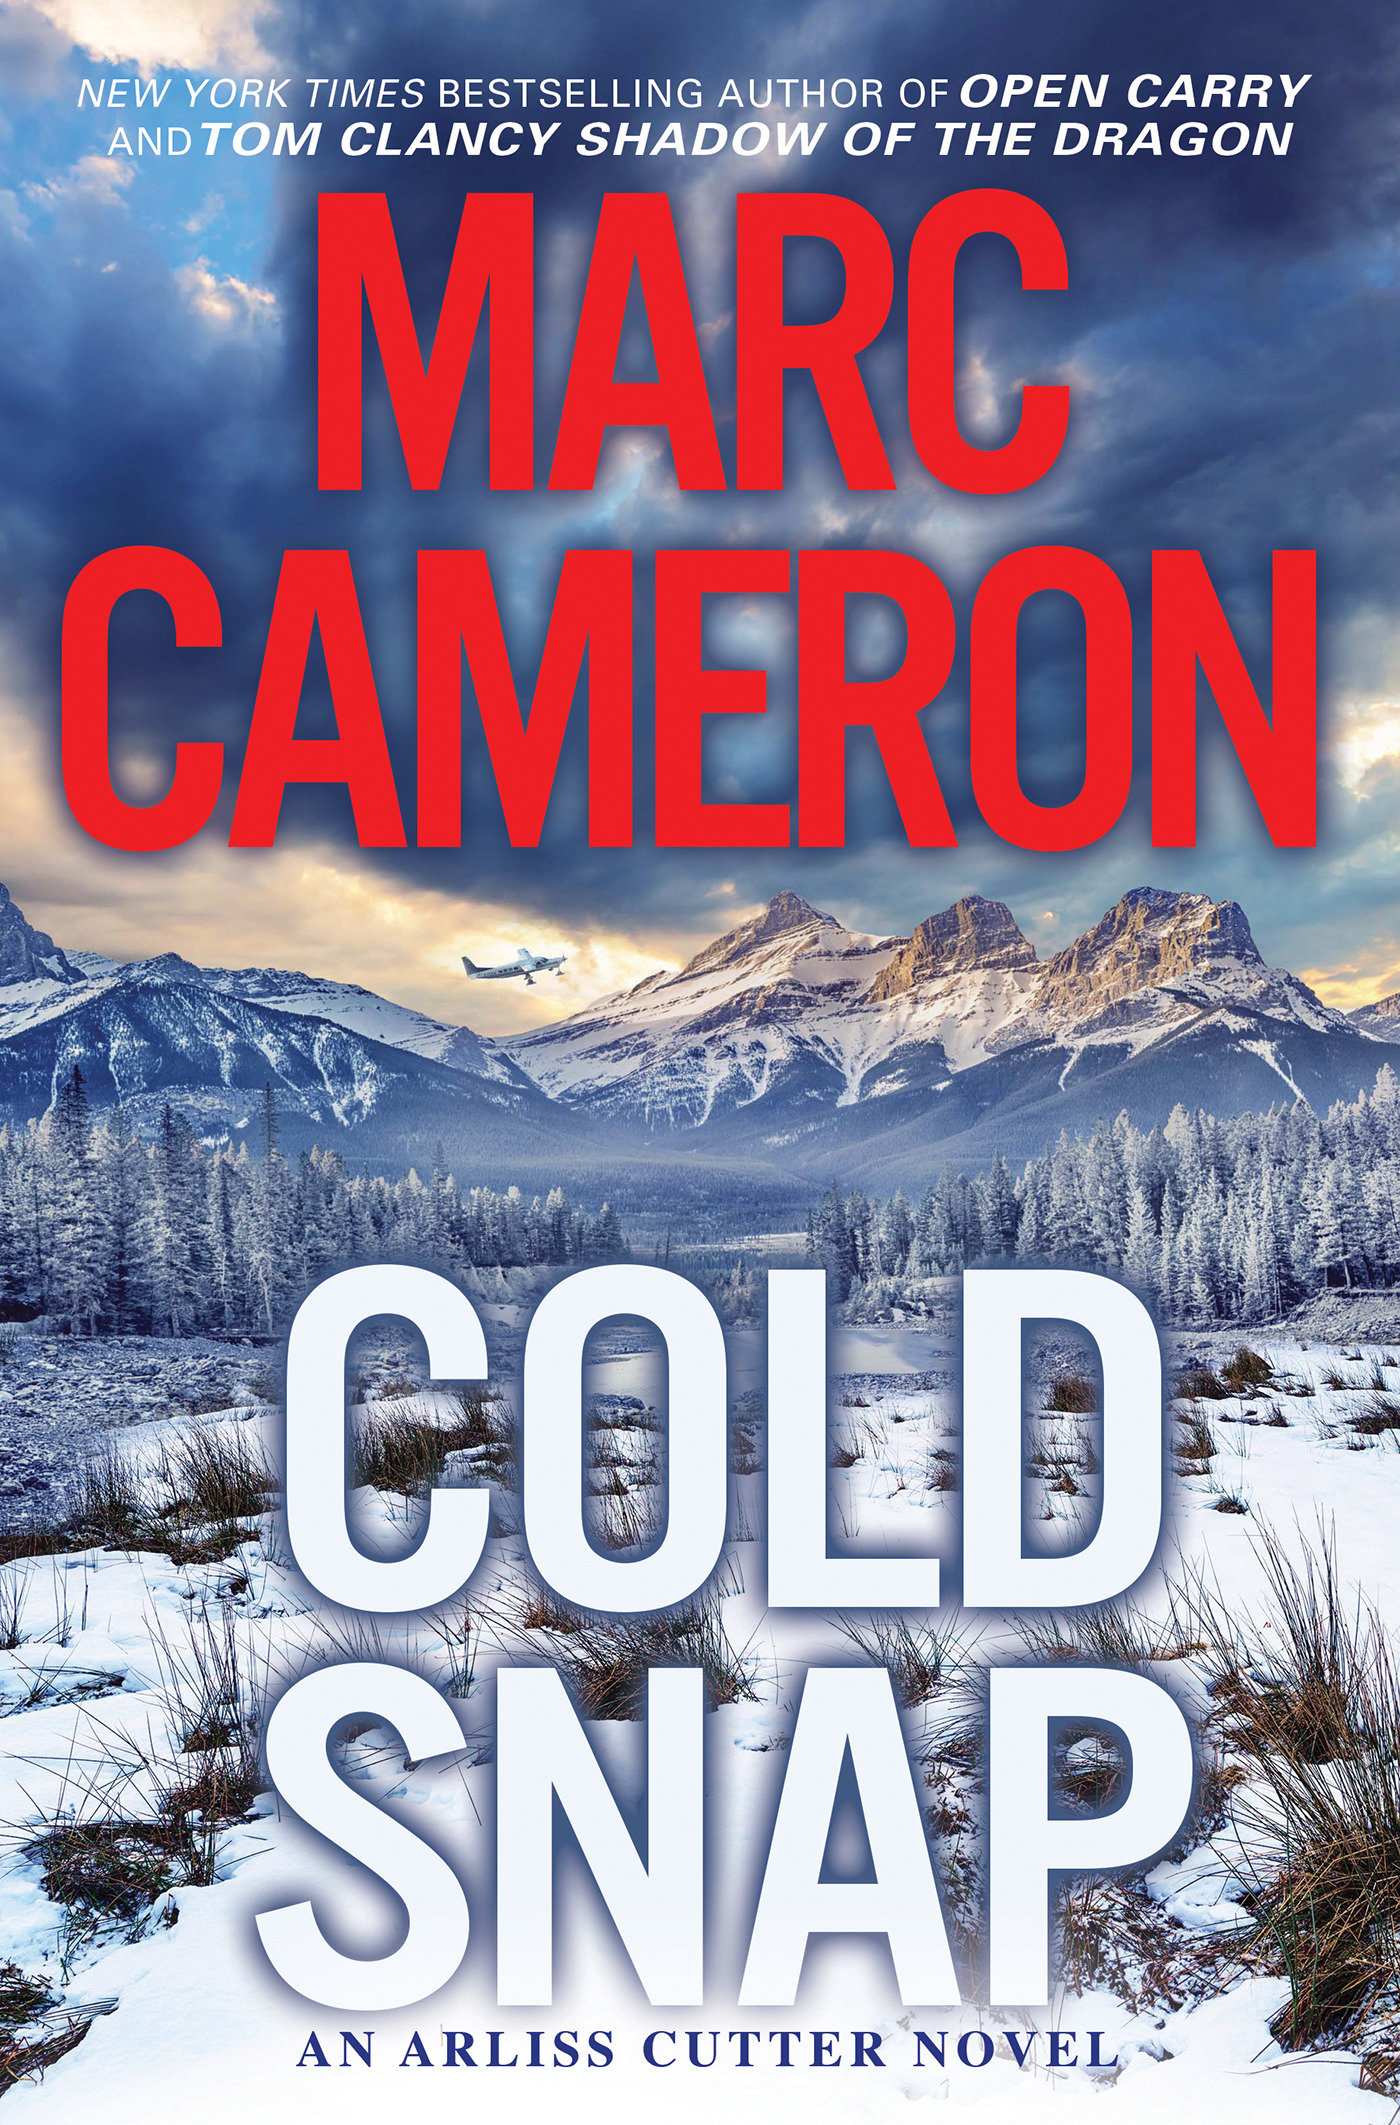 Cold Snap (Hardcover Book)